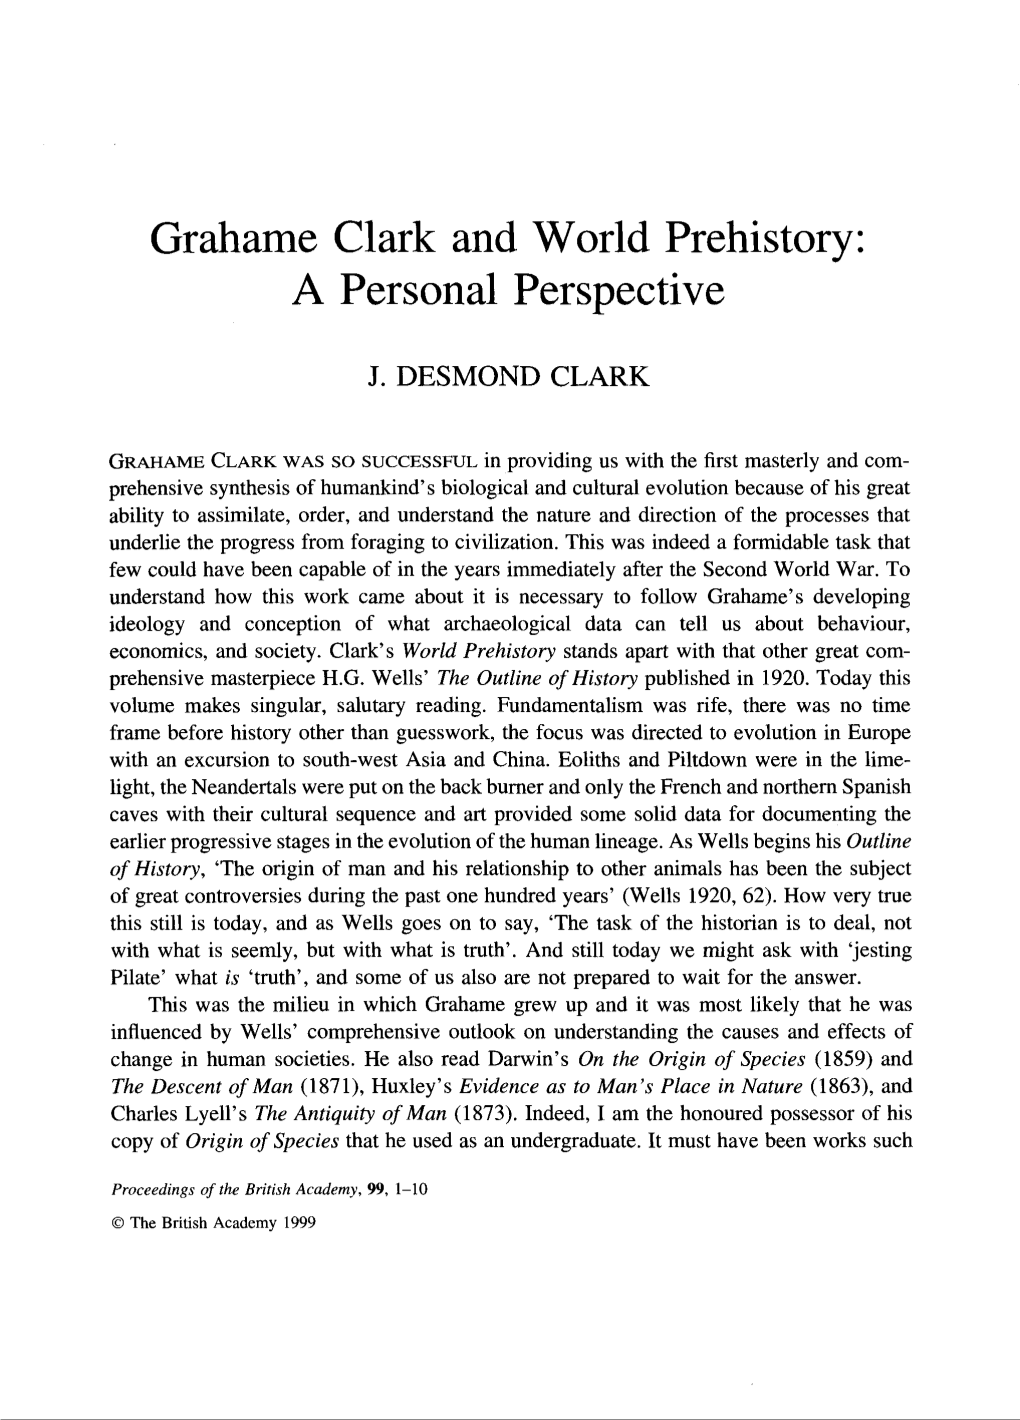 Grahame Clark and World Prehistory: a Personal Perspective